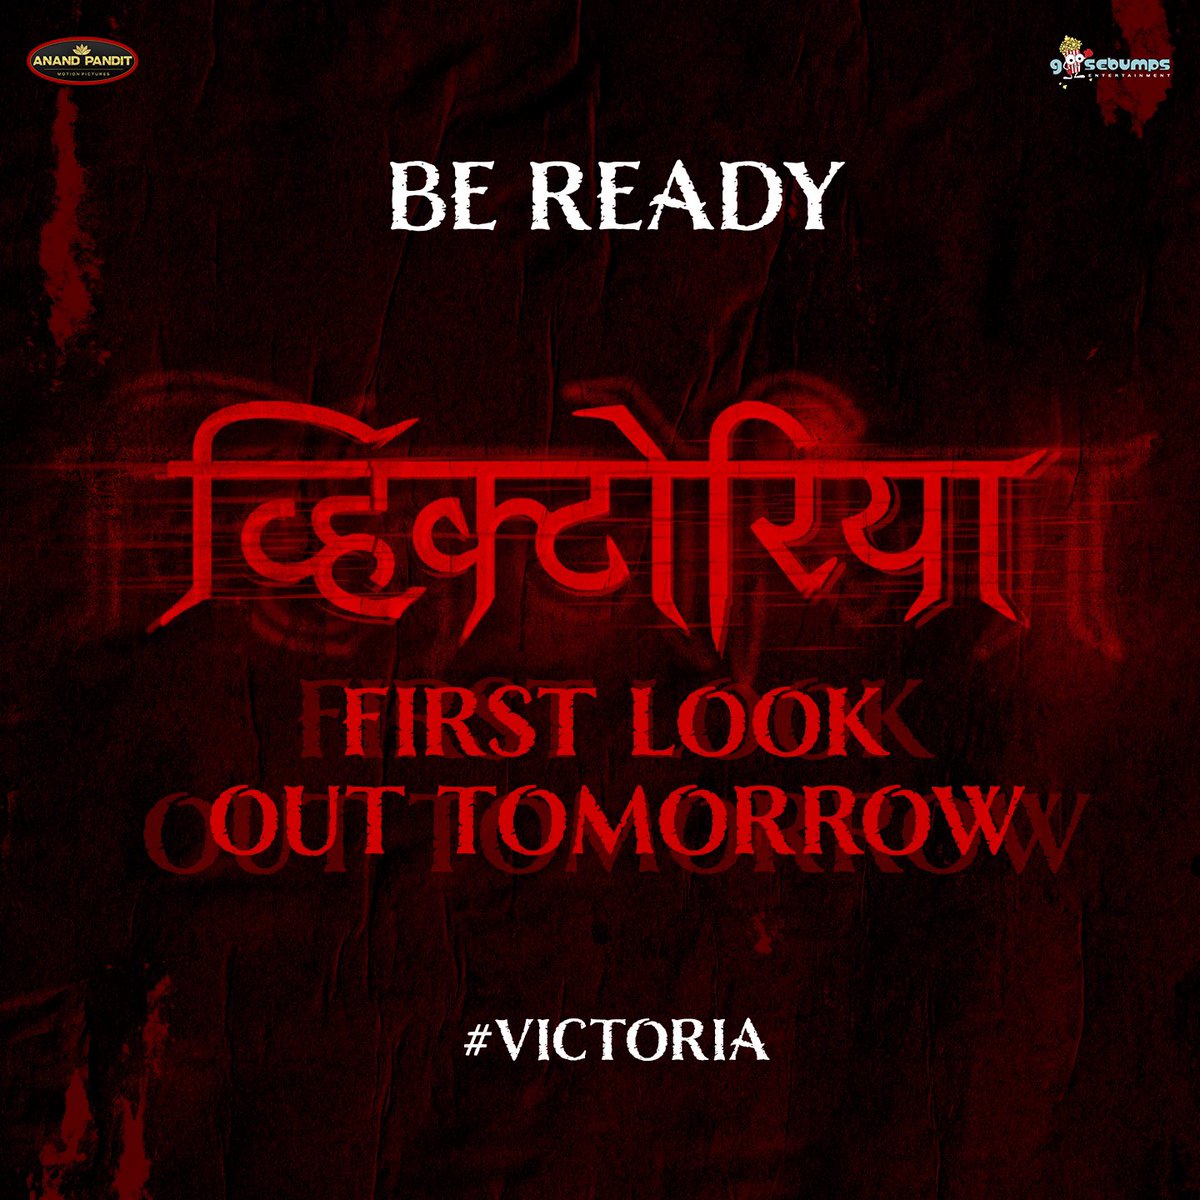 First Glimpse of #Victoria Out Tomorrow. 

Produced by #AnandPanditMotionPictures & #GoosebumpsEntertainment 

Directed by - #JeetAshok & #VirajasKulkarni 

Producers - #AnandPandit #RoopaPandit & #PushkarJog